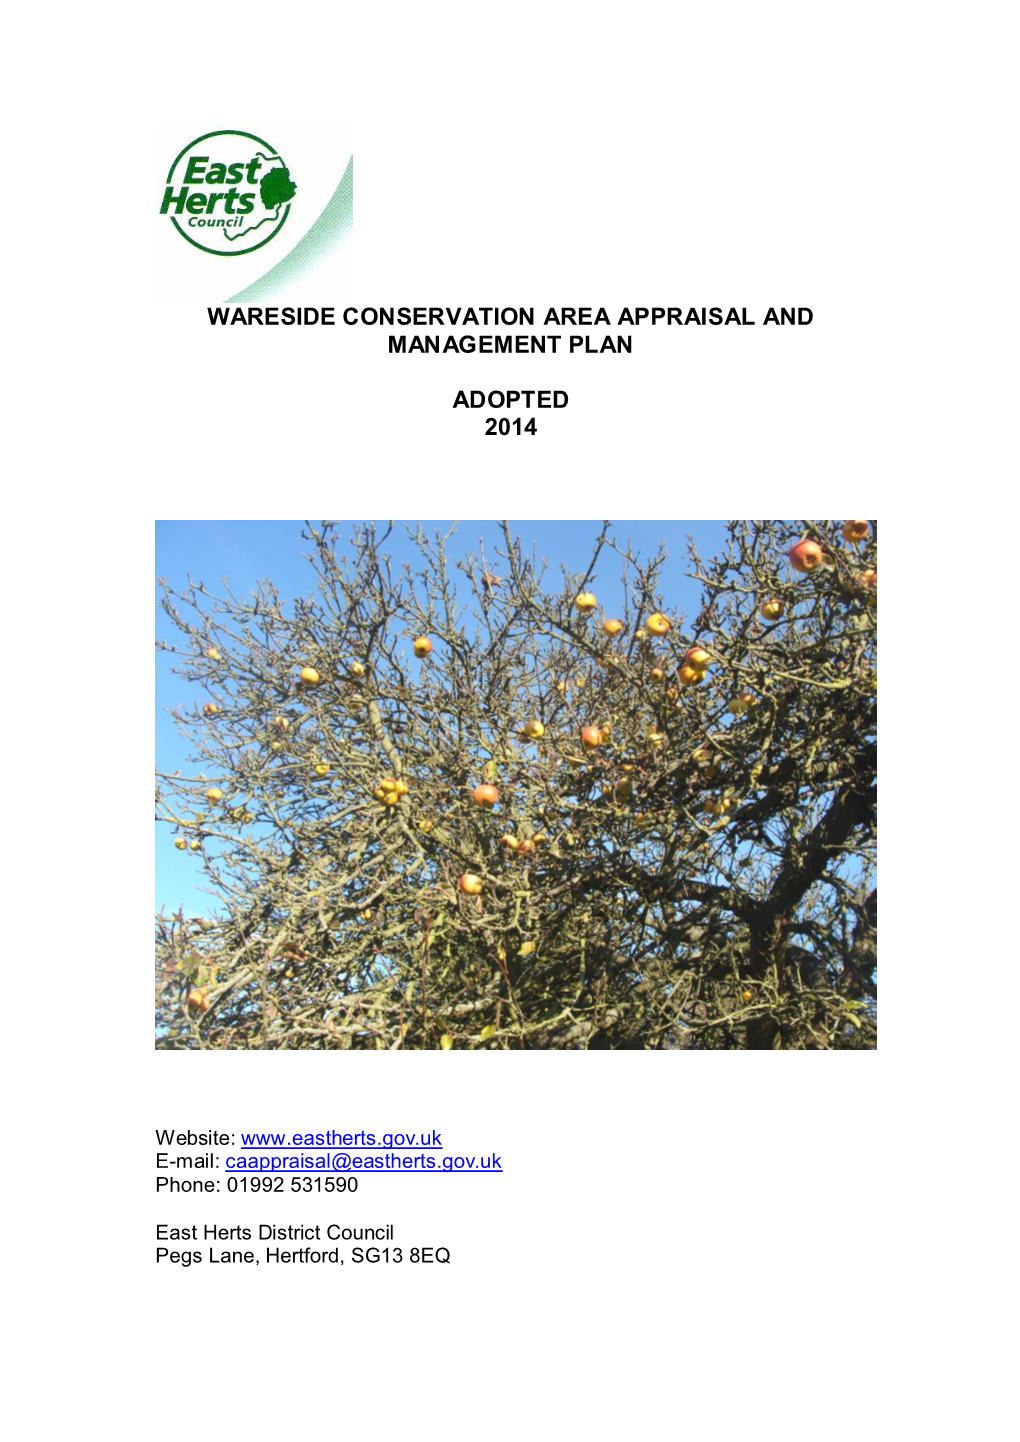 Wareside Conservation Area Appraisal and Management Plan